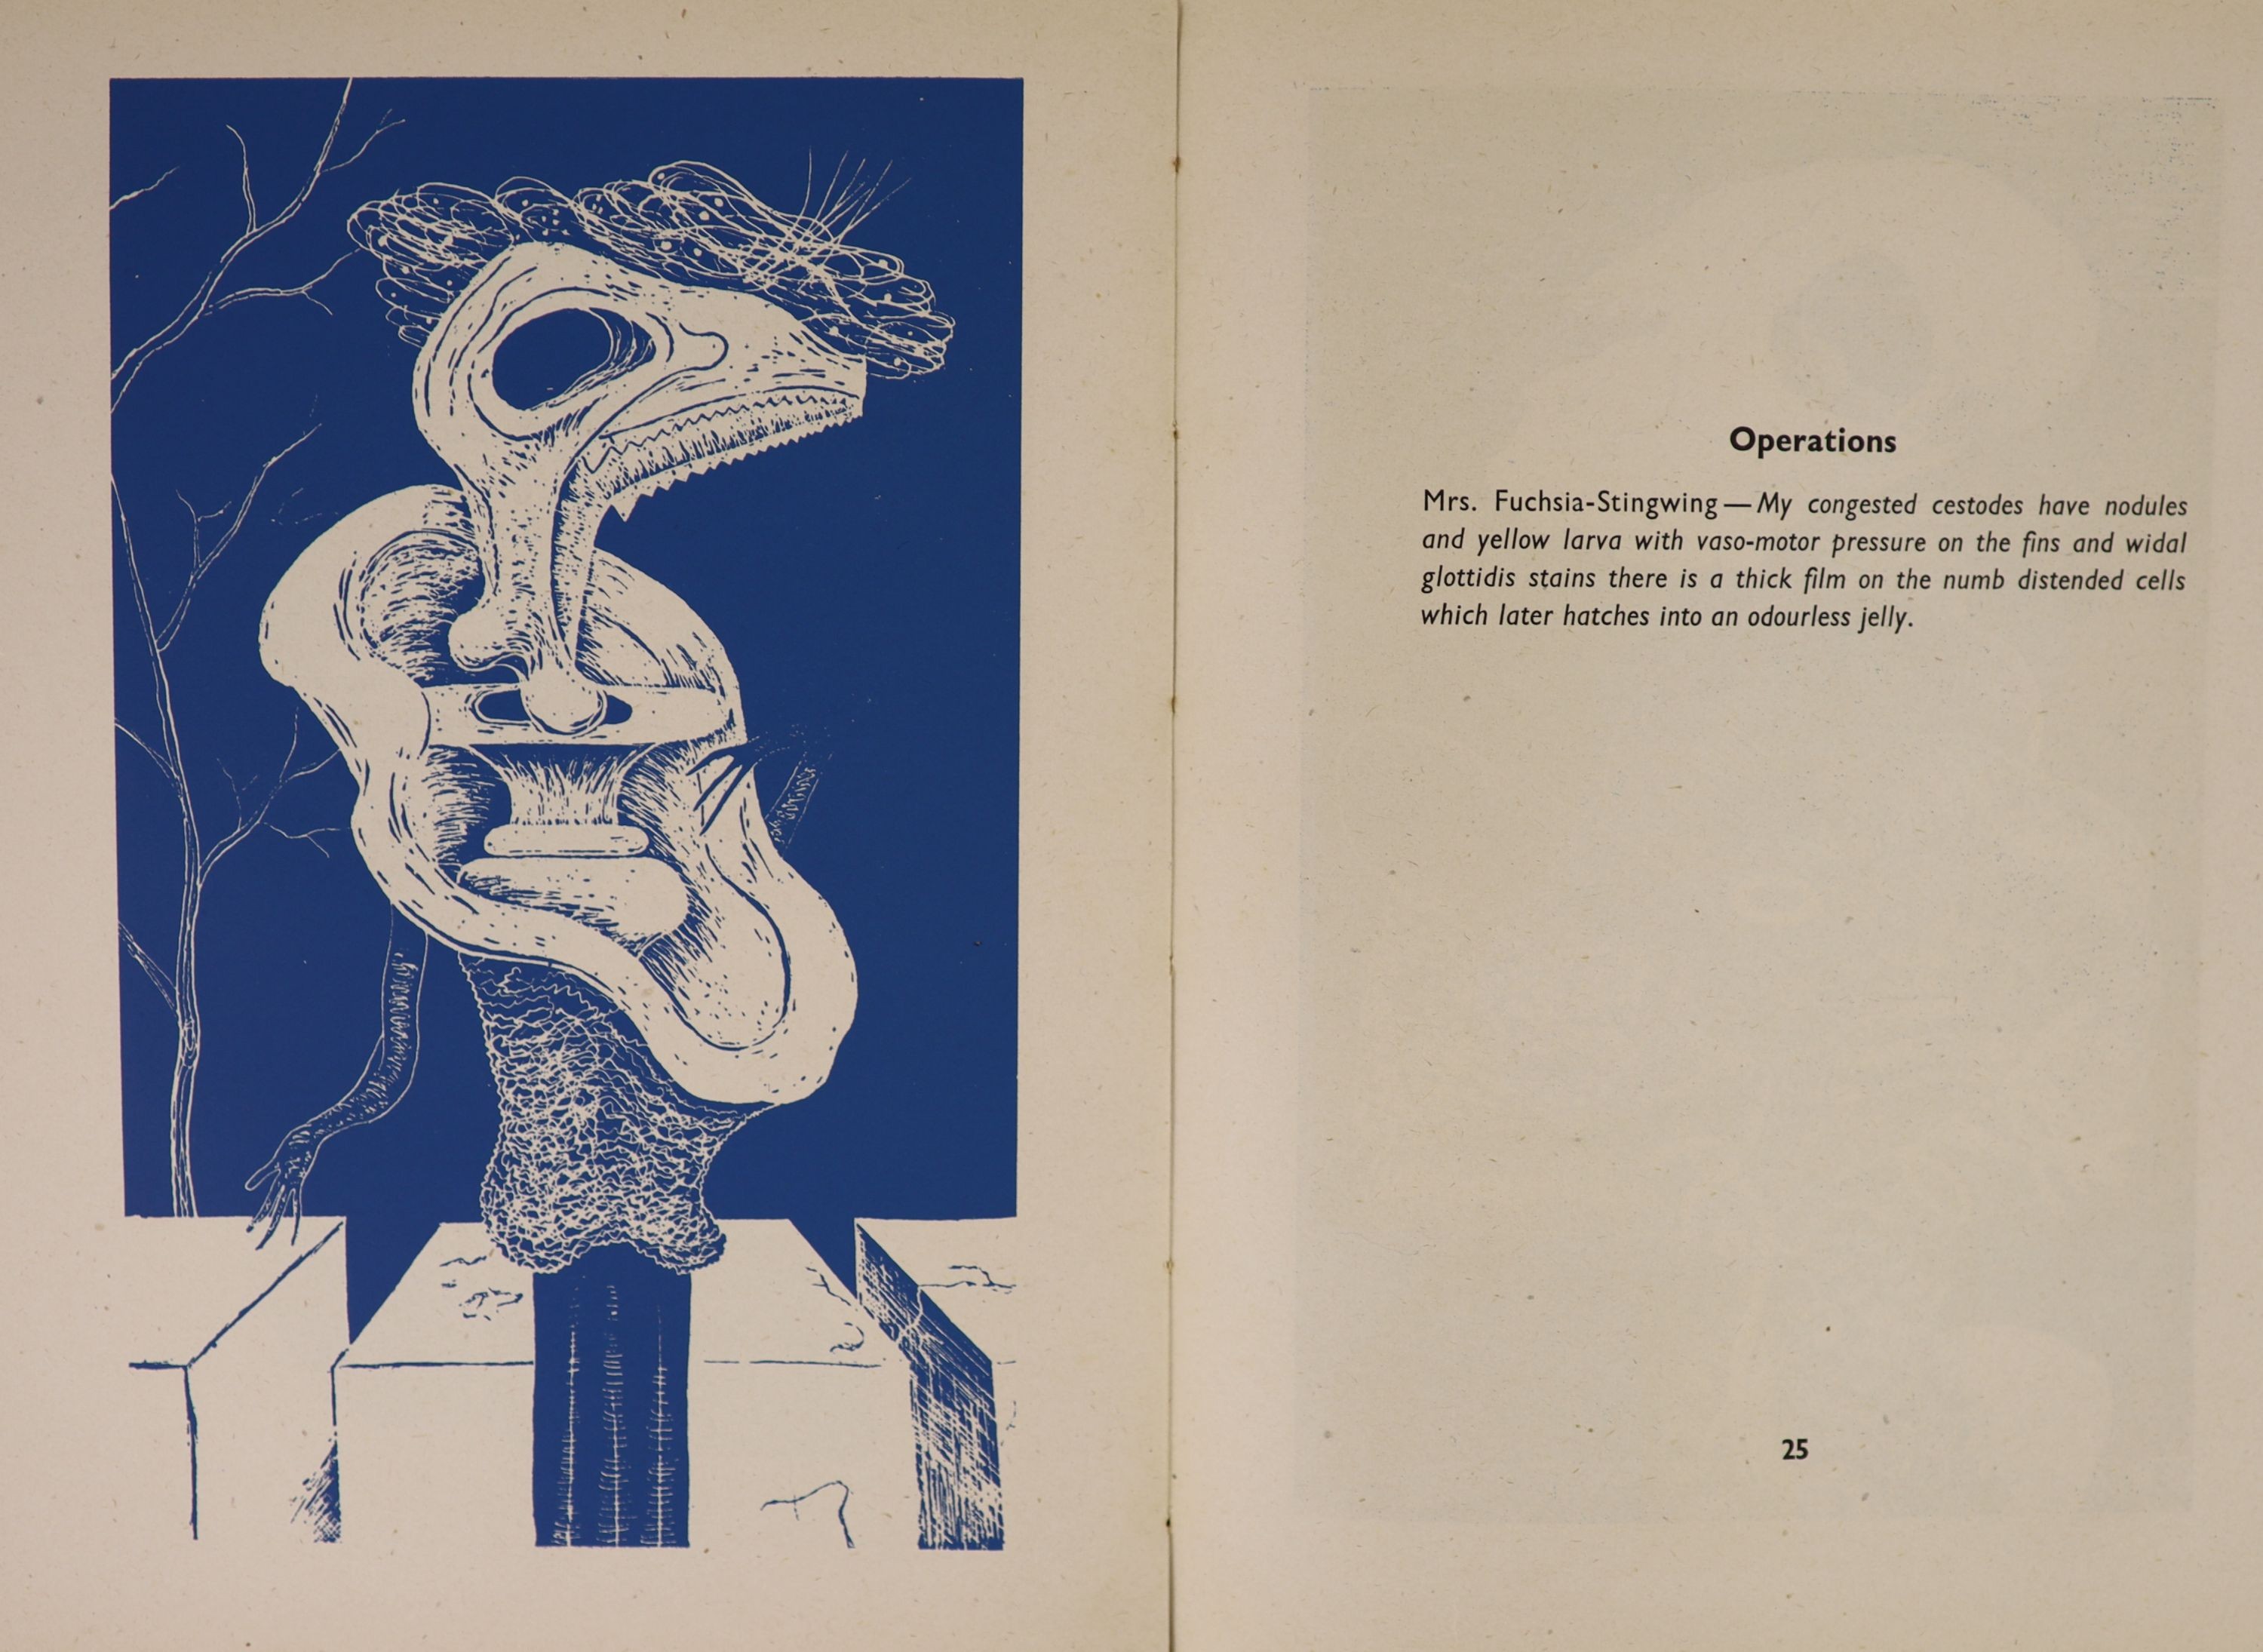 Banting, John - A Blue Book of Conversation, 1st edition, original blue cloth, with unclipped d/j, title page and 26 cyanotype illustrations by the author, Editions Poetry, London, 1946